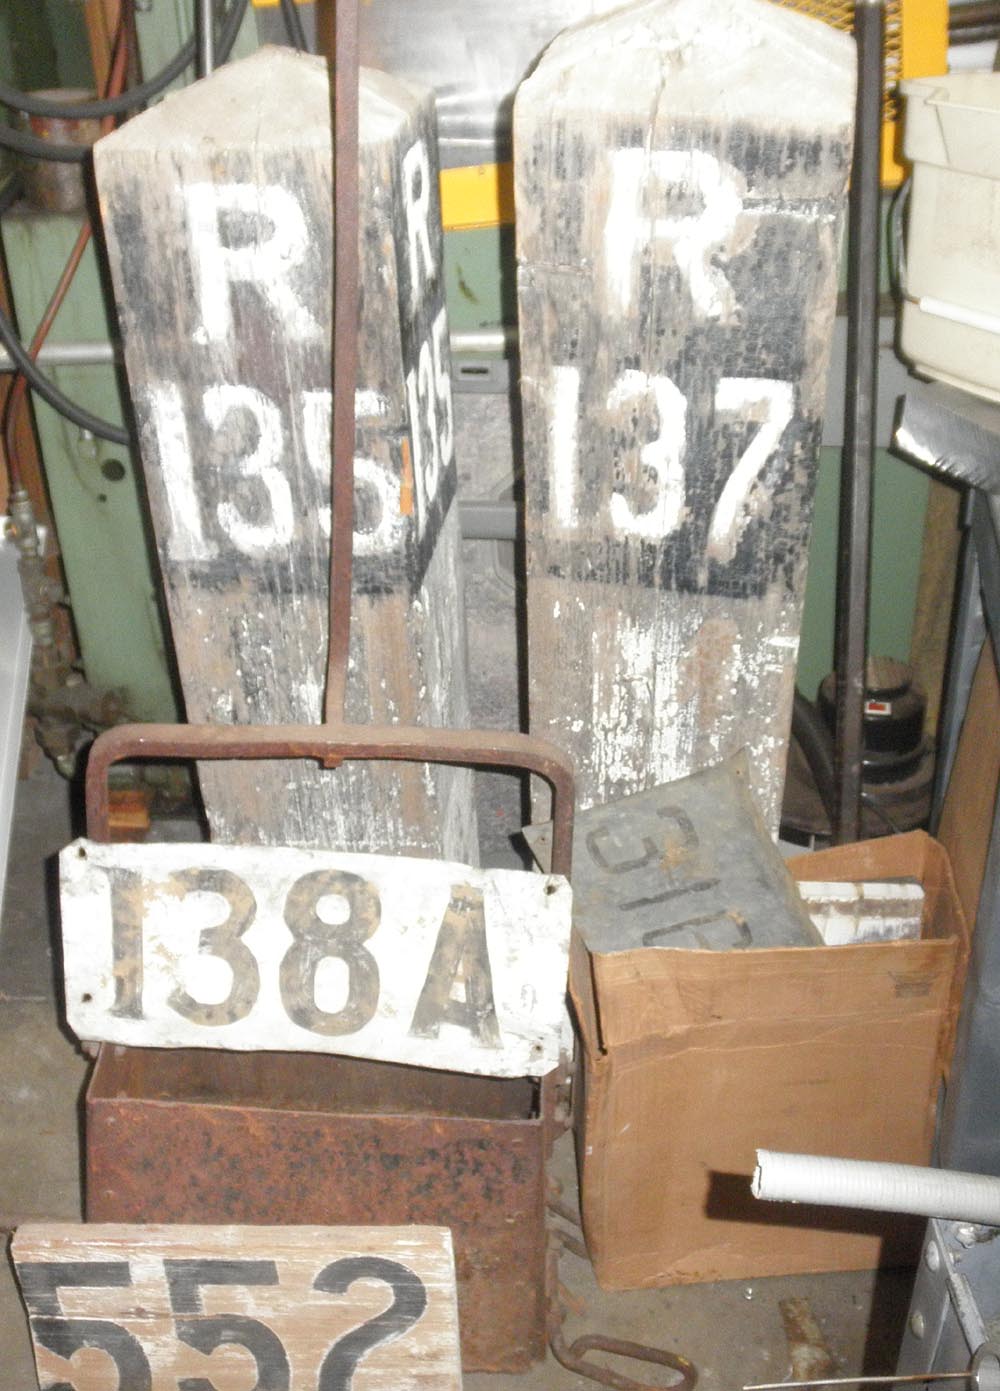 RGS Mileposts 135 and 137 and bridge marker 138A.jpg